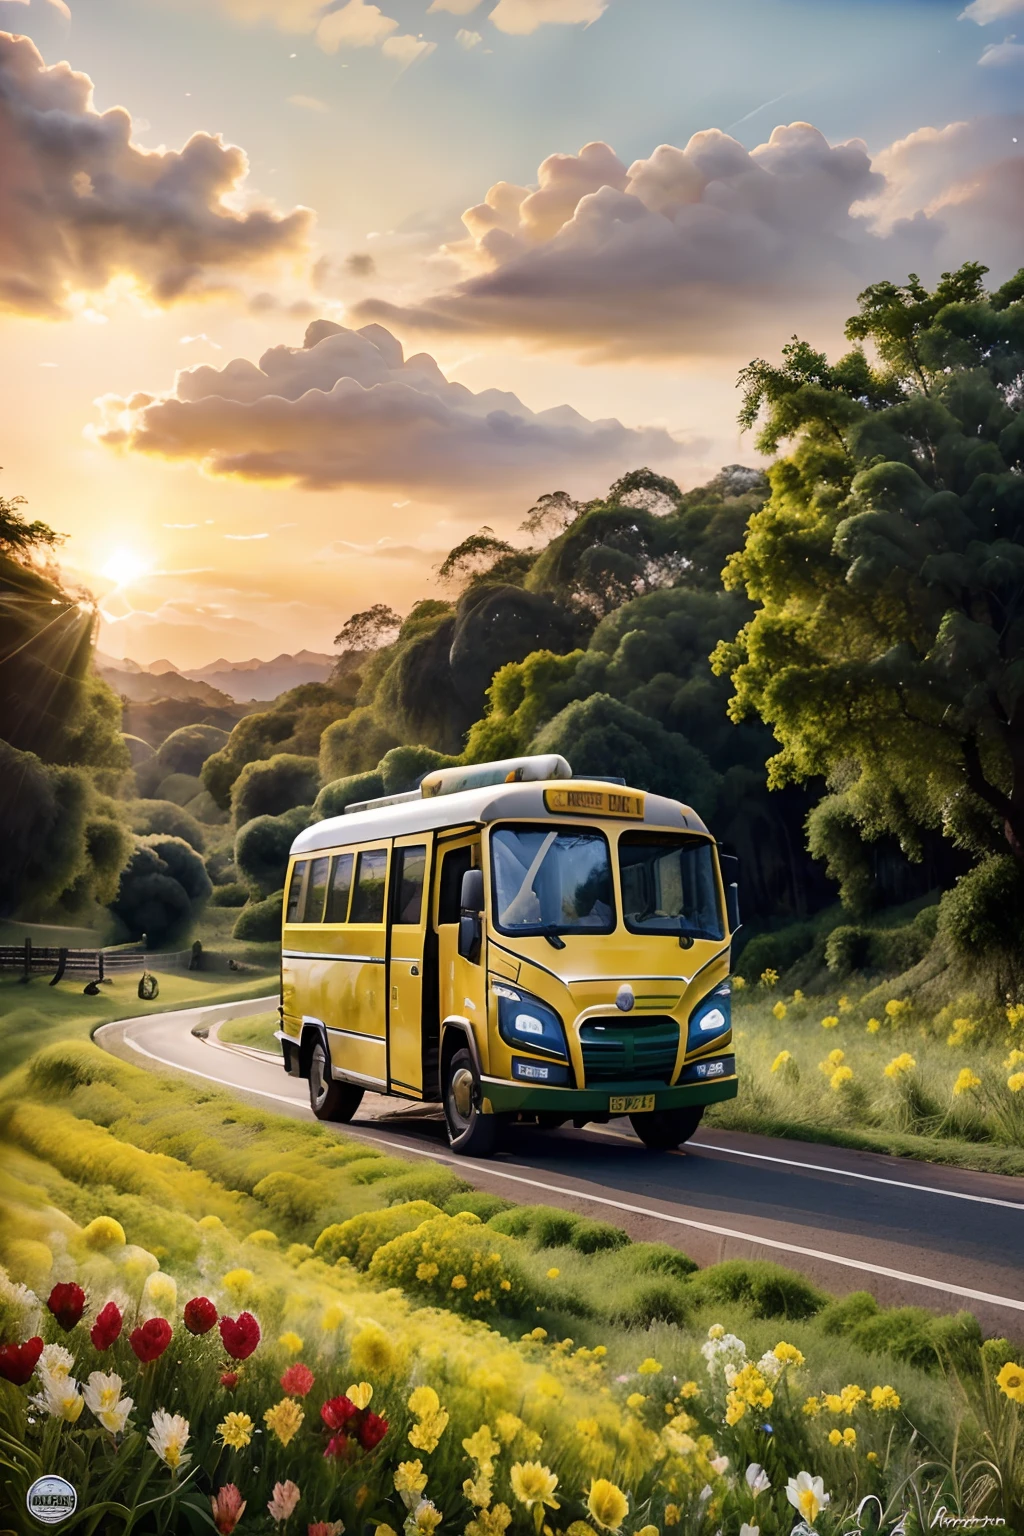 a road with flower fields on your left and right, Yellow bus in half, Fanfic Scenario, Sunset time, dark atmospher, watercolor painting style art